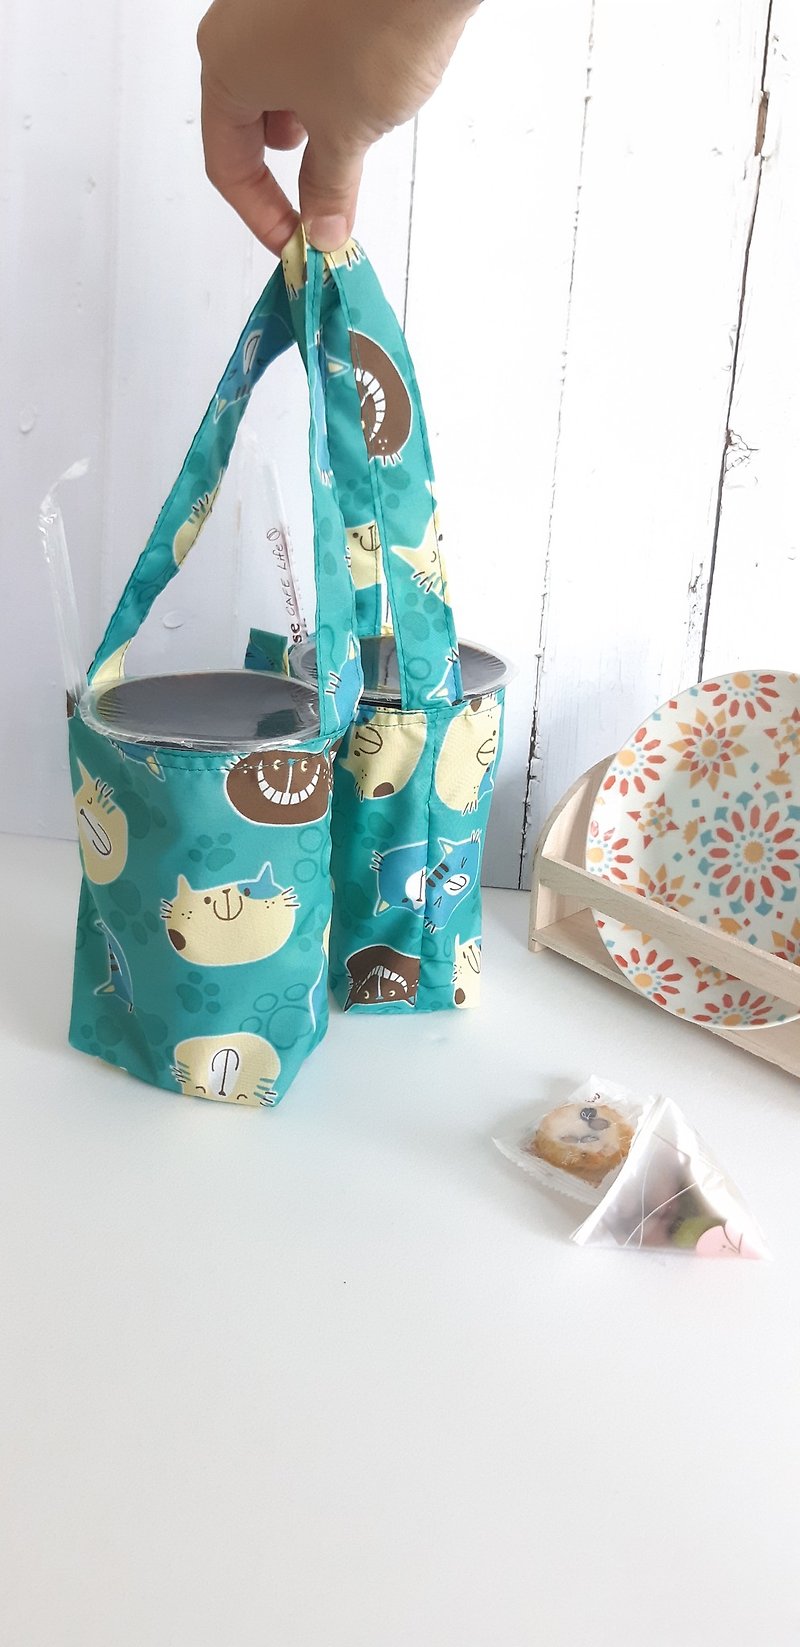 Smiling Cat 2 Eco-friendly Waterproof Beverage Bag_2 cups can be 1 cup_normal size ice tyrant cup size - Beverage Holders & Bags - Waterproof Material 